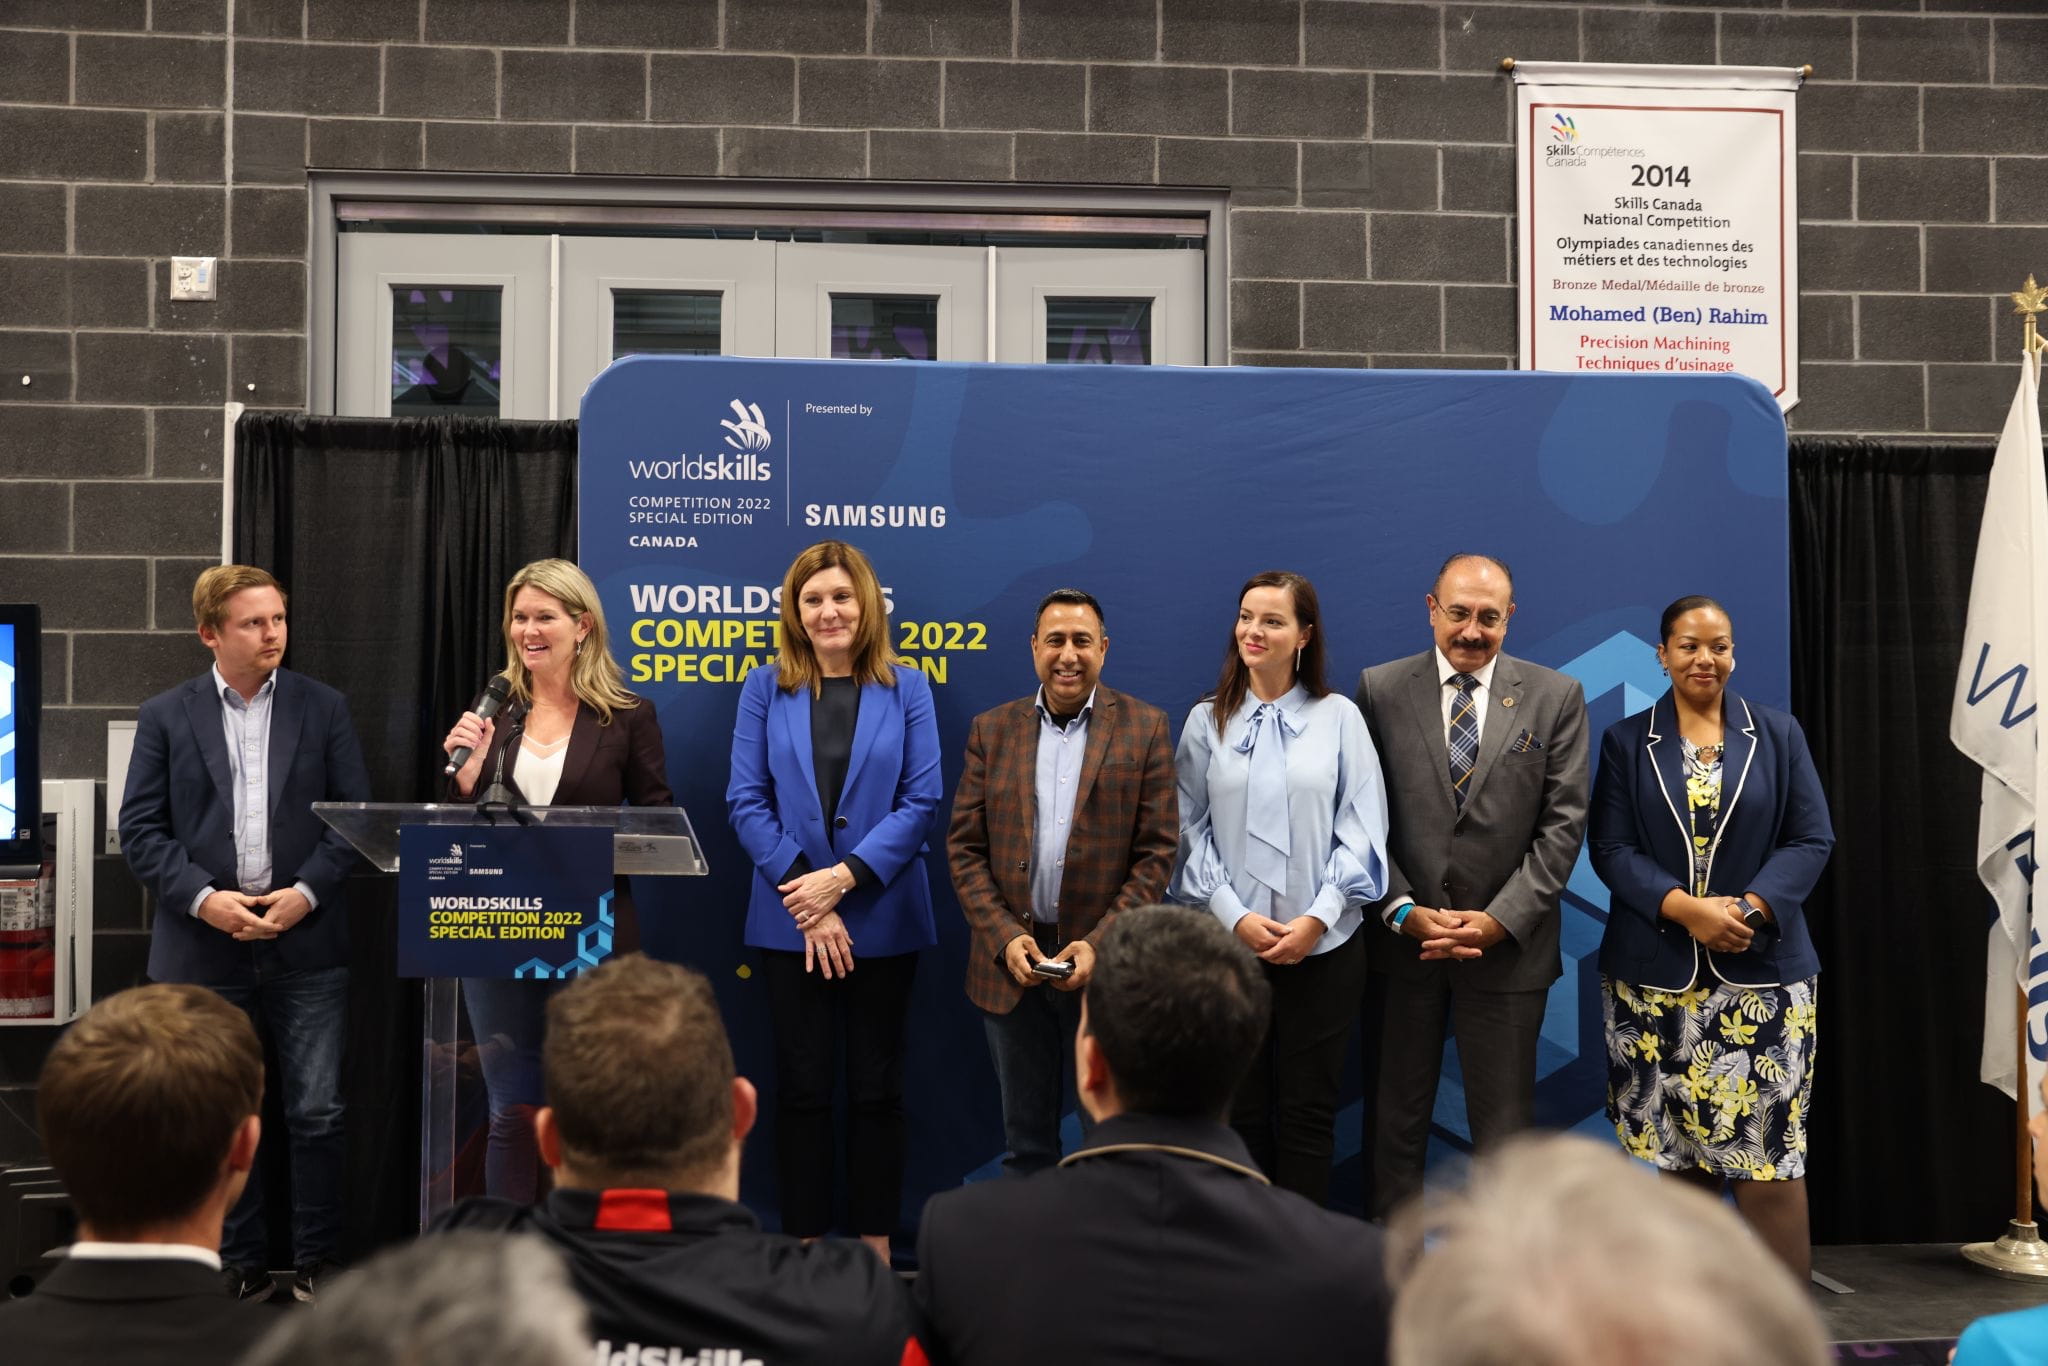 Ontario Minister of Colleges and Universities Jill Dunlop and fellow MPPs Graham McGregor, Natalie Pierre, Deepak Anand, Natalia Kusendova, Sheref Sabawy and Charmaine Williams stand on the stage during the opening ceremonies of the WorldSkills Competition 2022 Special Edition's Industrial Mechanics event.